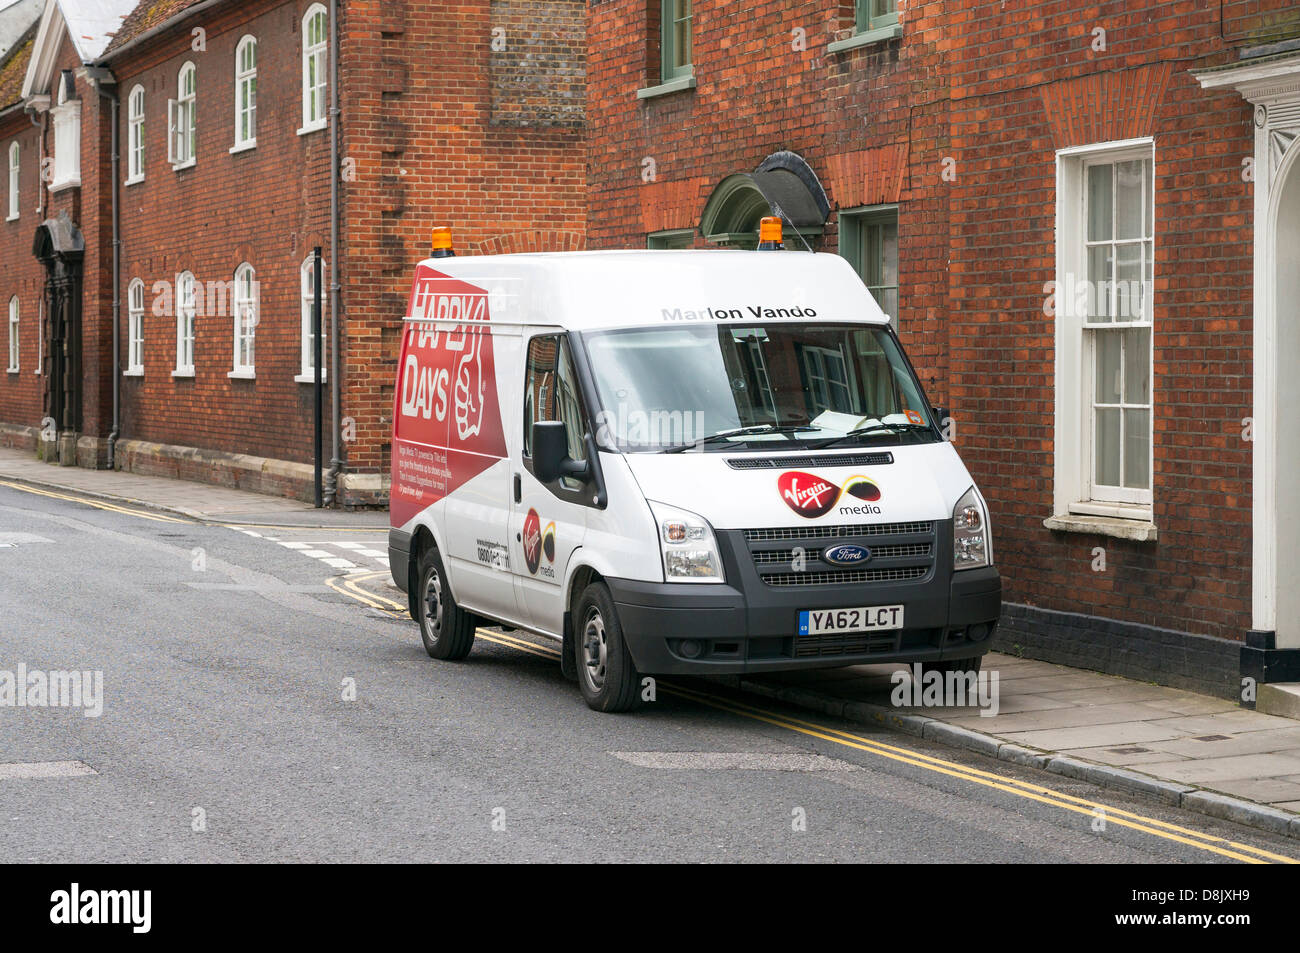 Virgin Media Ford Transit van parked on double yellow lines and pavement sidewalk Stock Photo